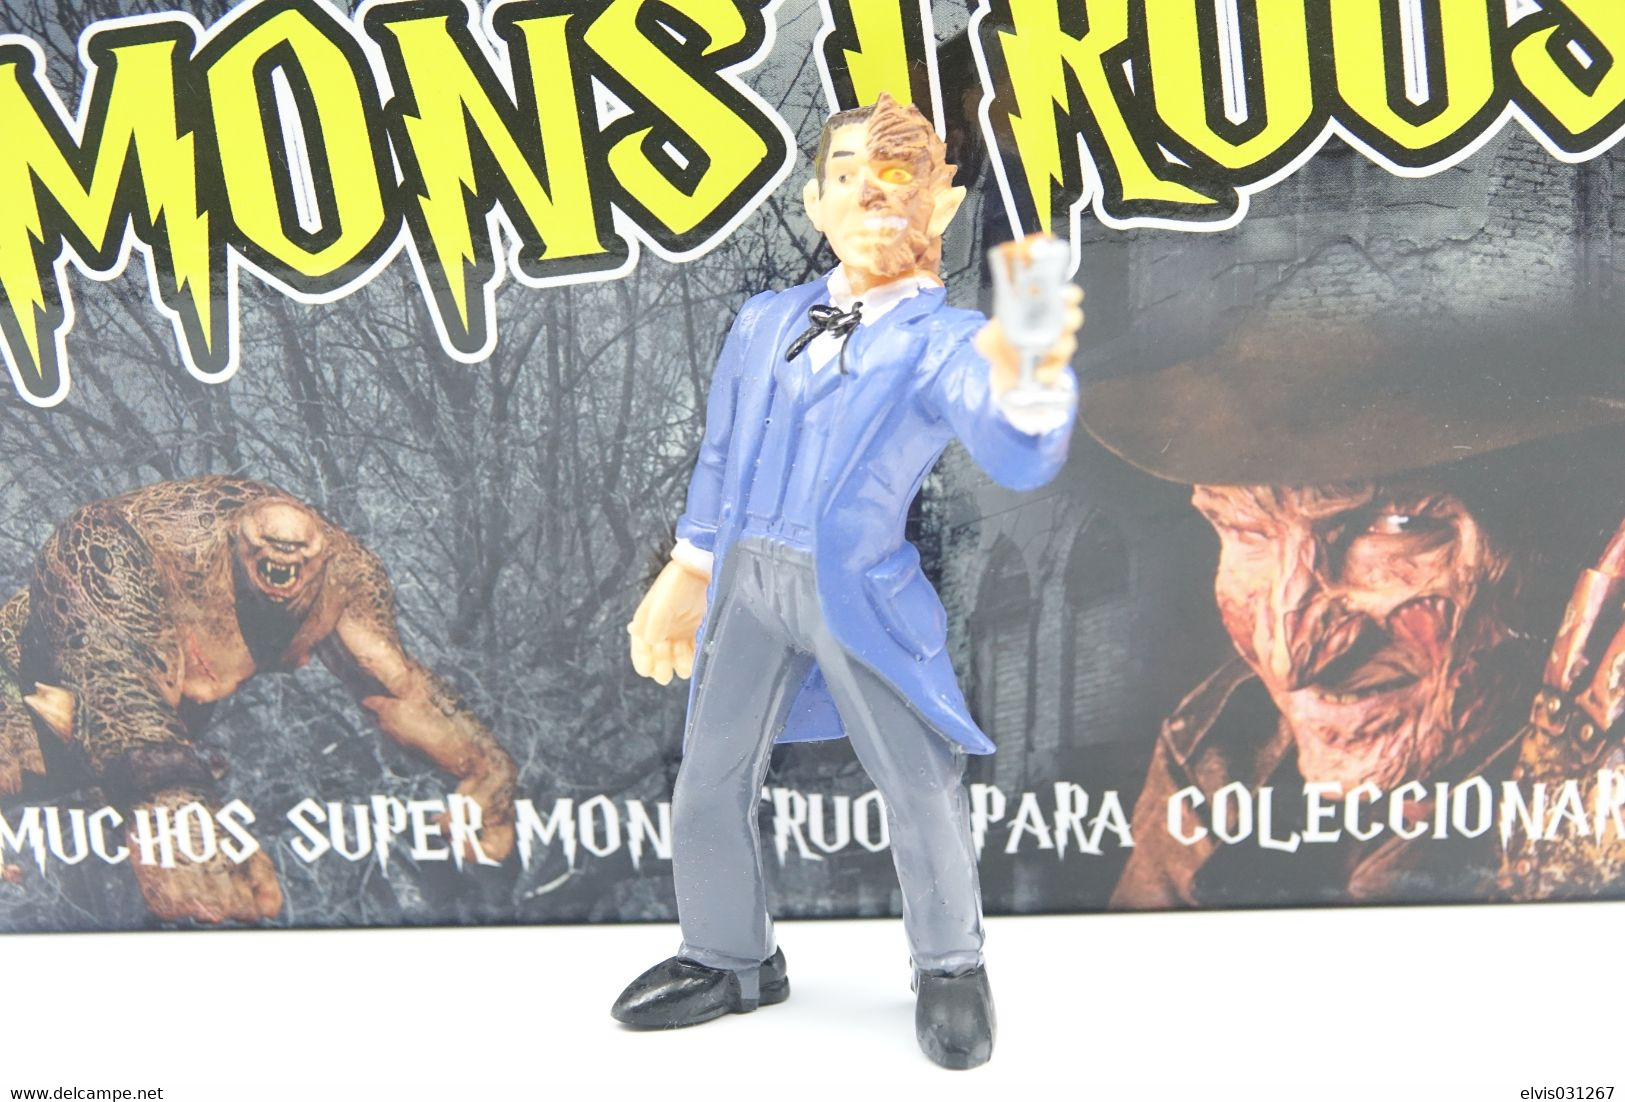 Vintage ACTION FIGURE : COLLECTION MONSTERS SUPER MONSTRUOS Doctor Jekyll - 1990's - Original Yolanda Toys - Action Man